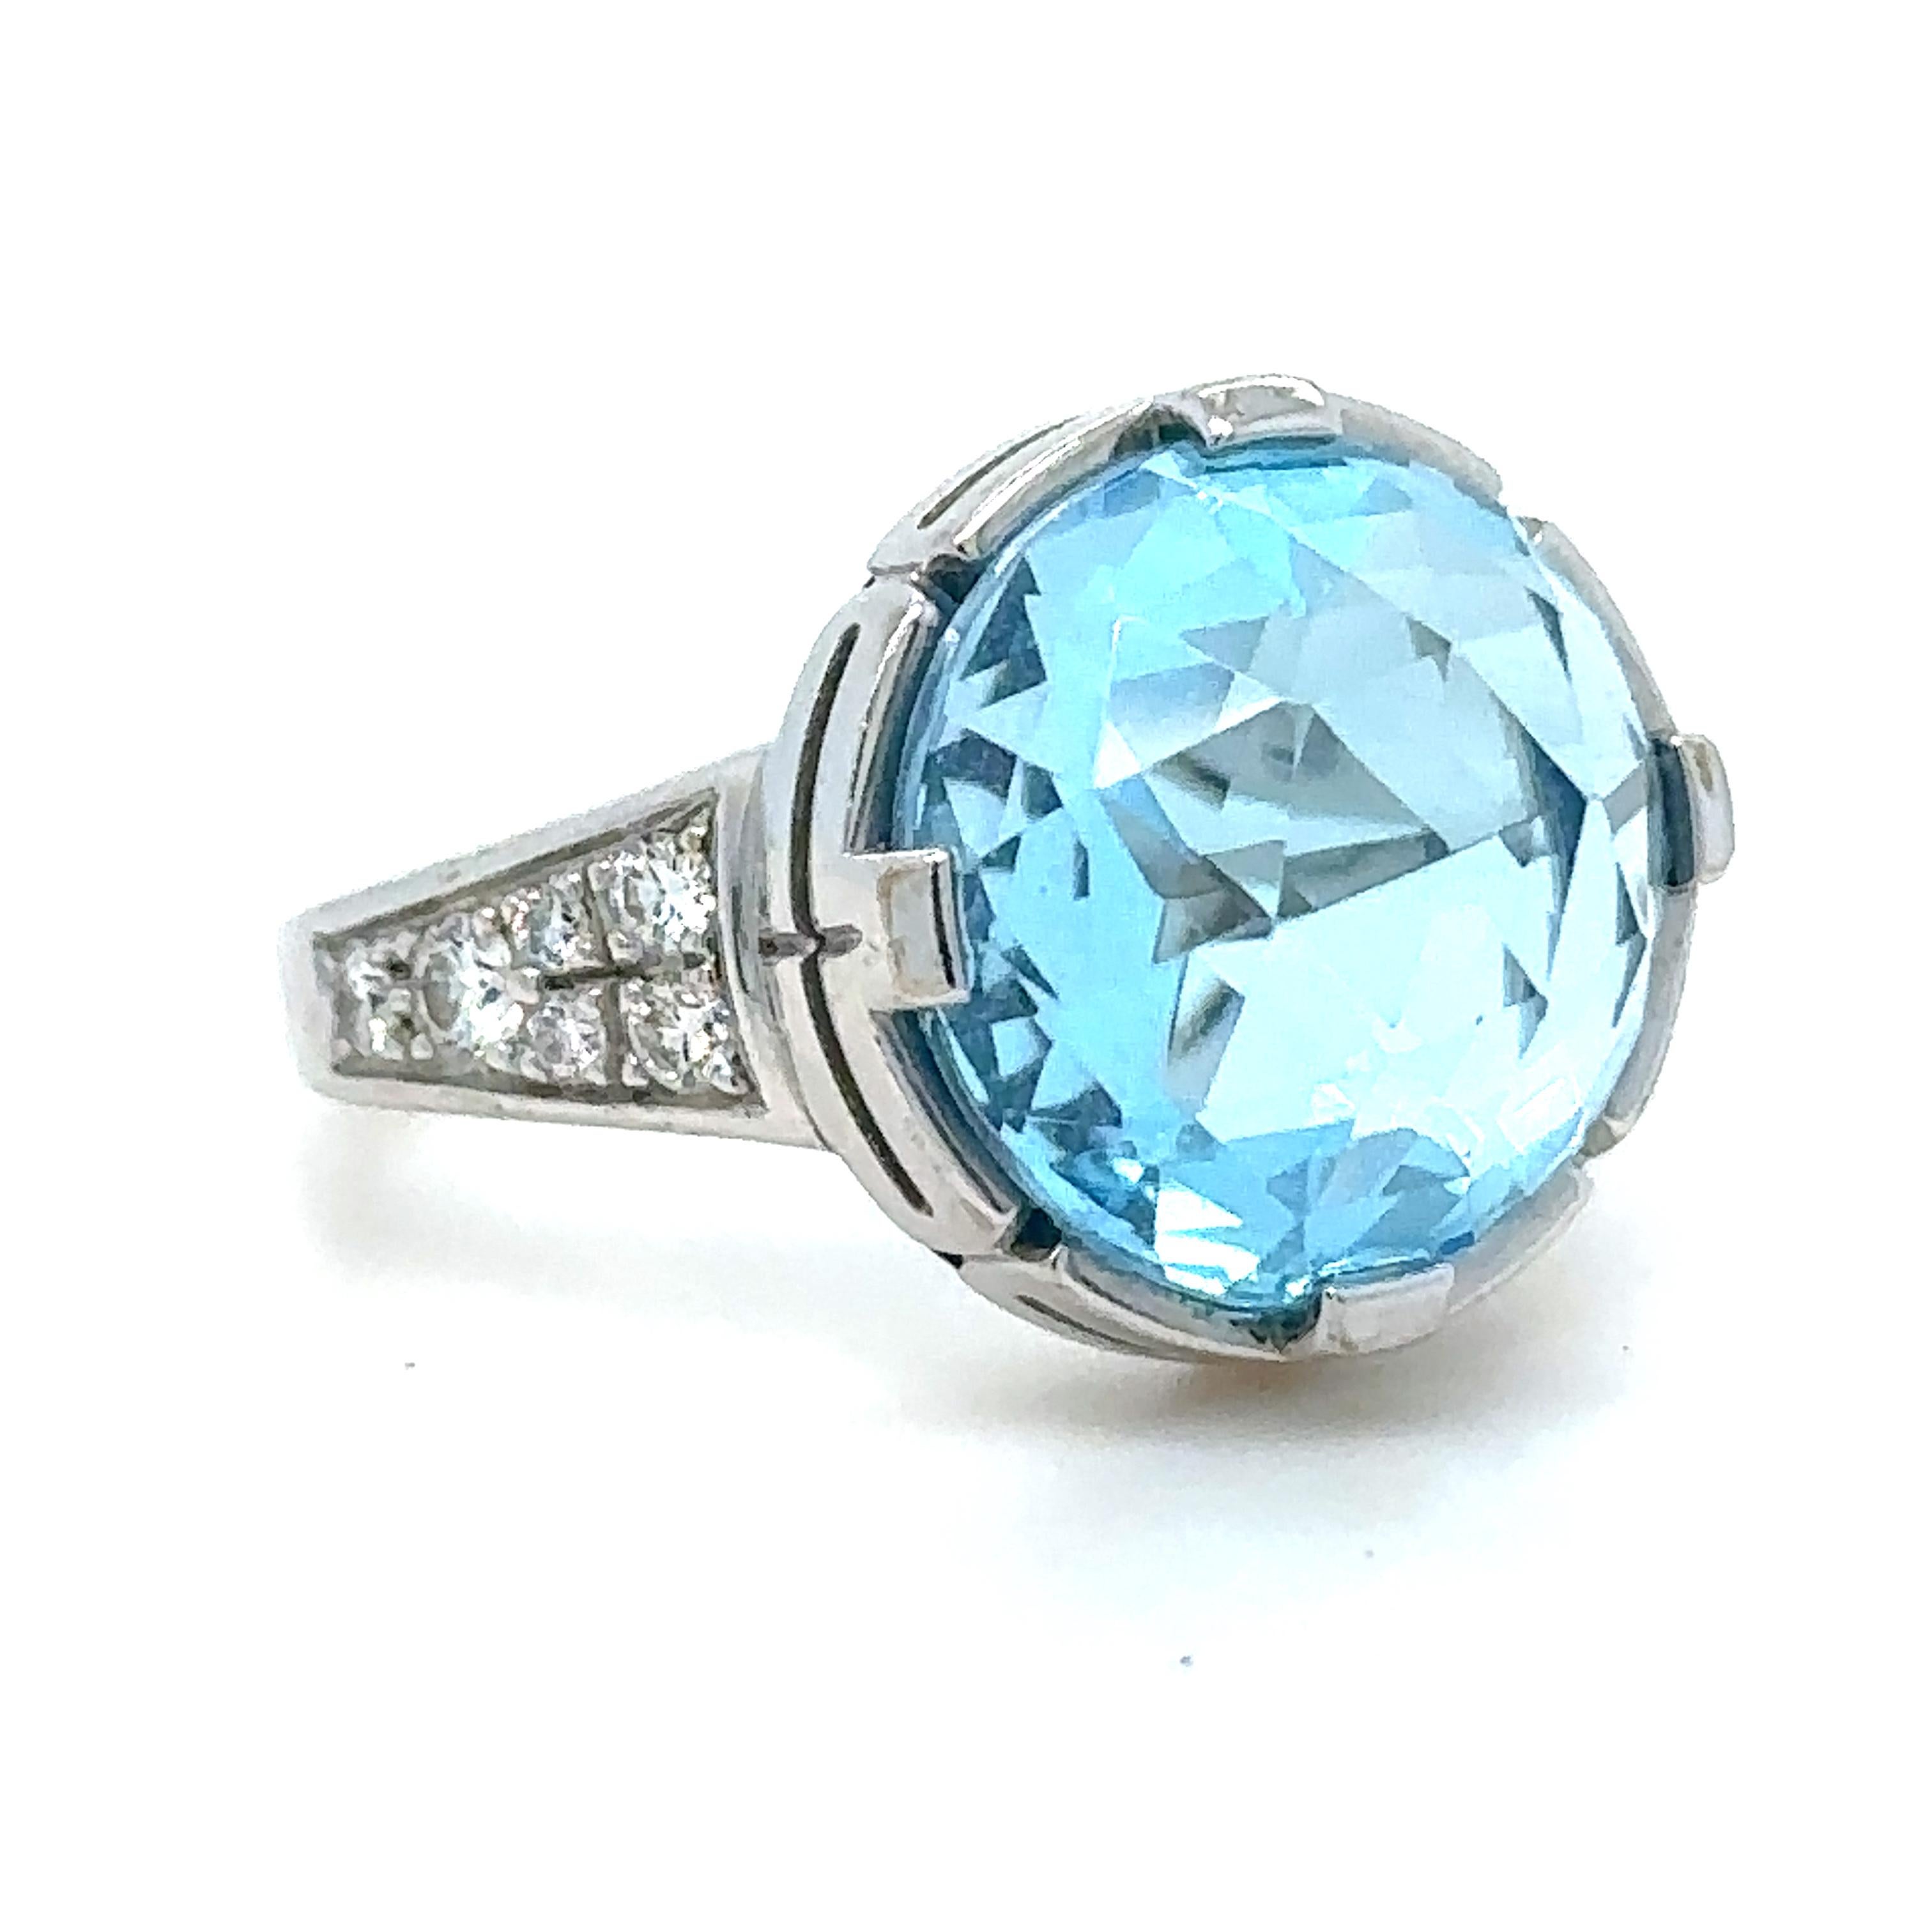 A Bvlgari Parentesi Diamond Topaz Cocktail Ring in White Gold with One large Blue Topaz and 12 x diamonds.

Metal: 18k White Gold
Carat: Blue Topaz 2.3ct  Diamond 0.32ct
Colour: N/A
Clarity:  N/A
Cut: Round Brilliant Cut
Weight: 6.2